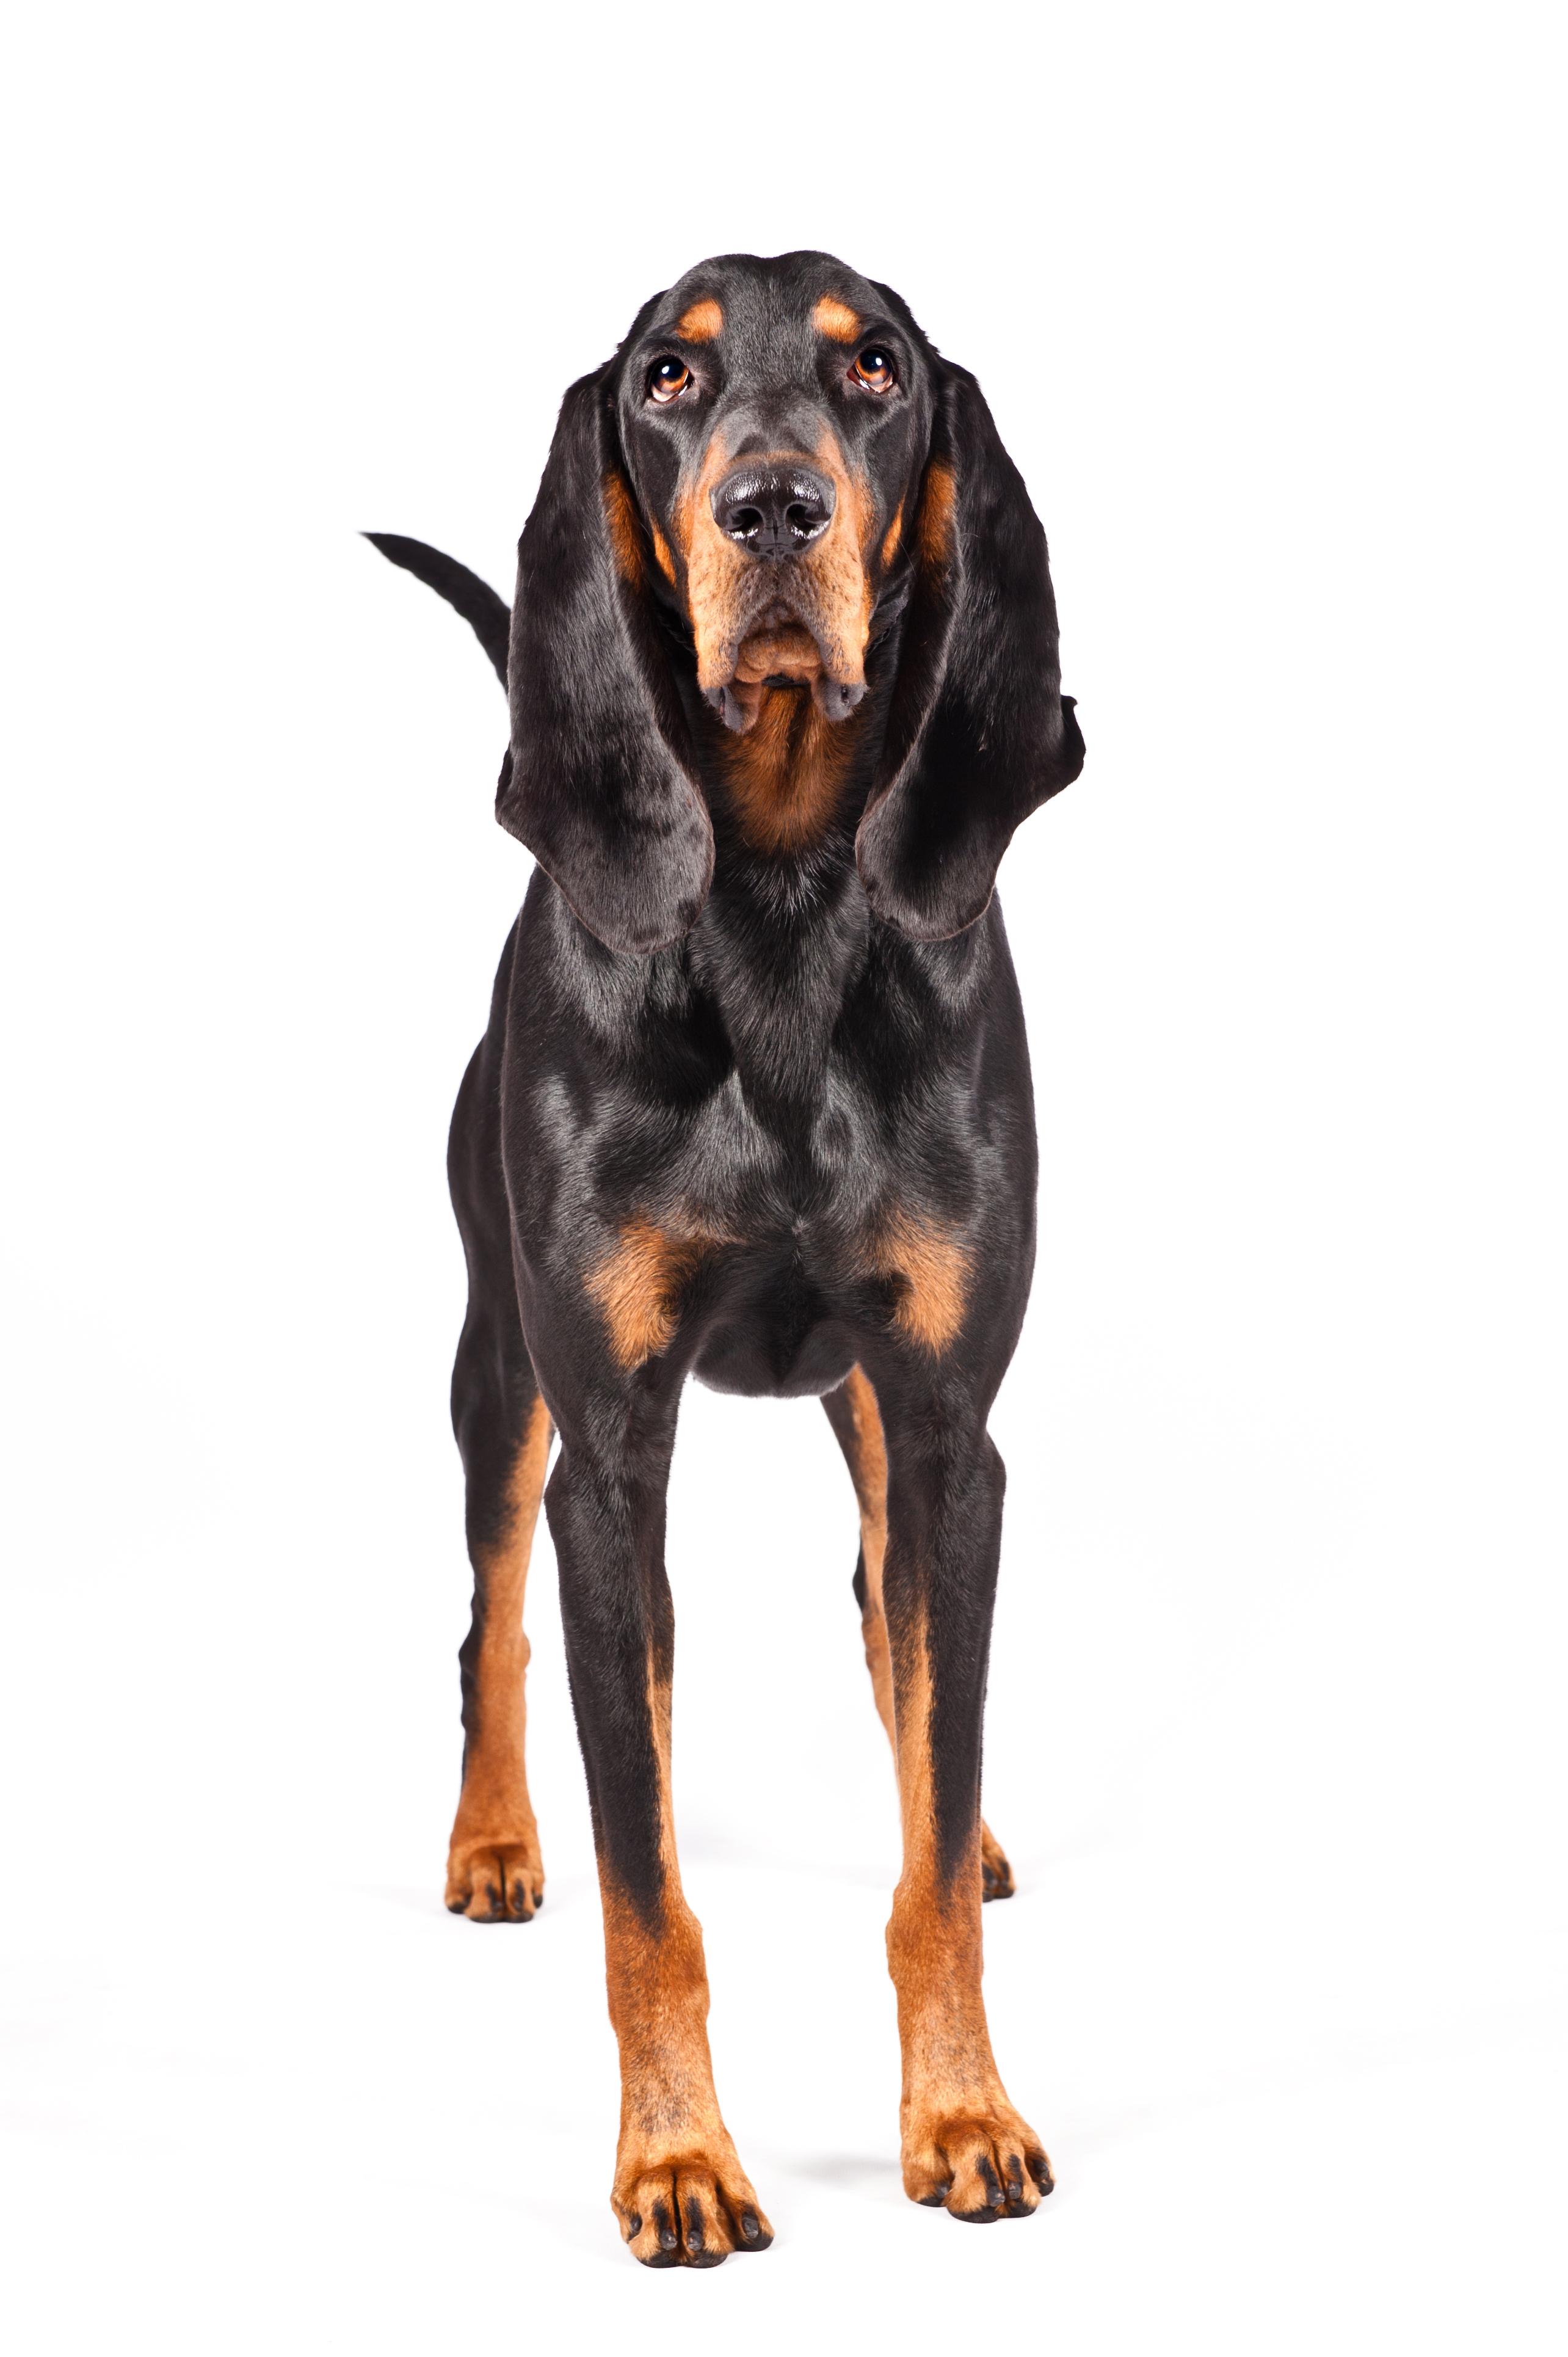 Dog of the Day. Black and Tan Coonhound Dog! Pet Photography